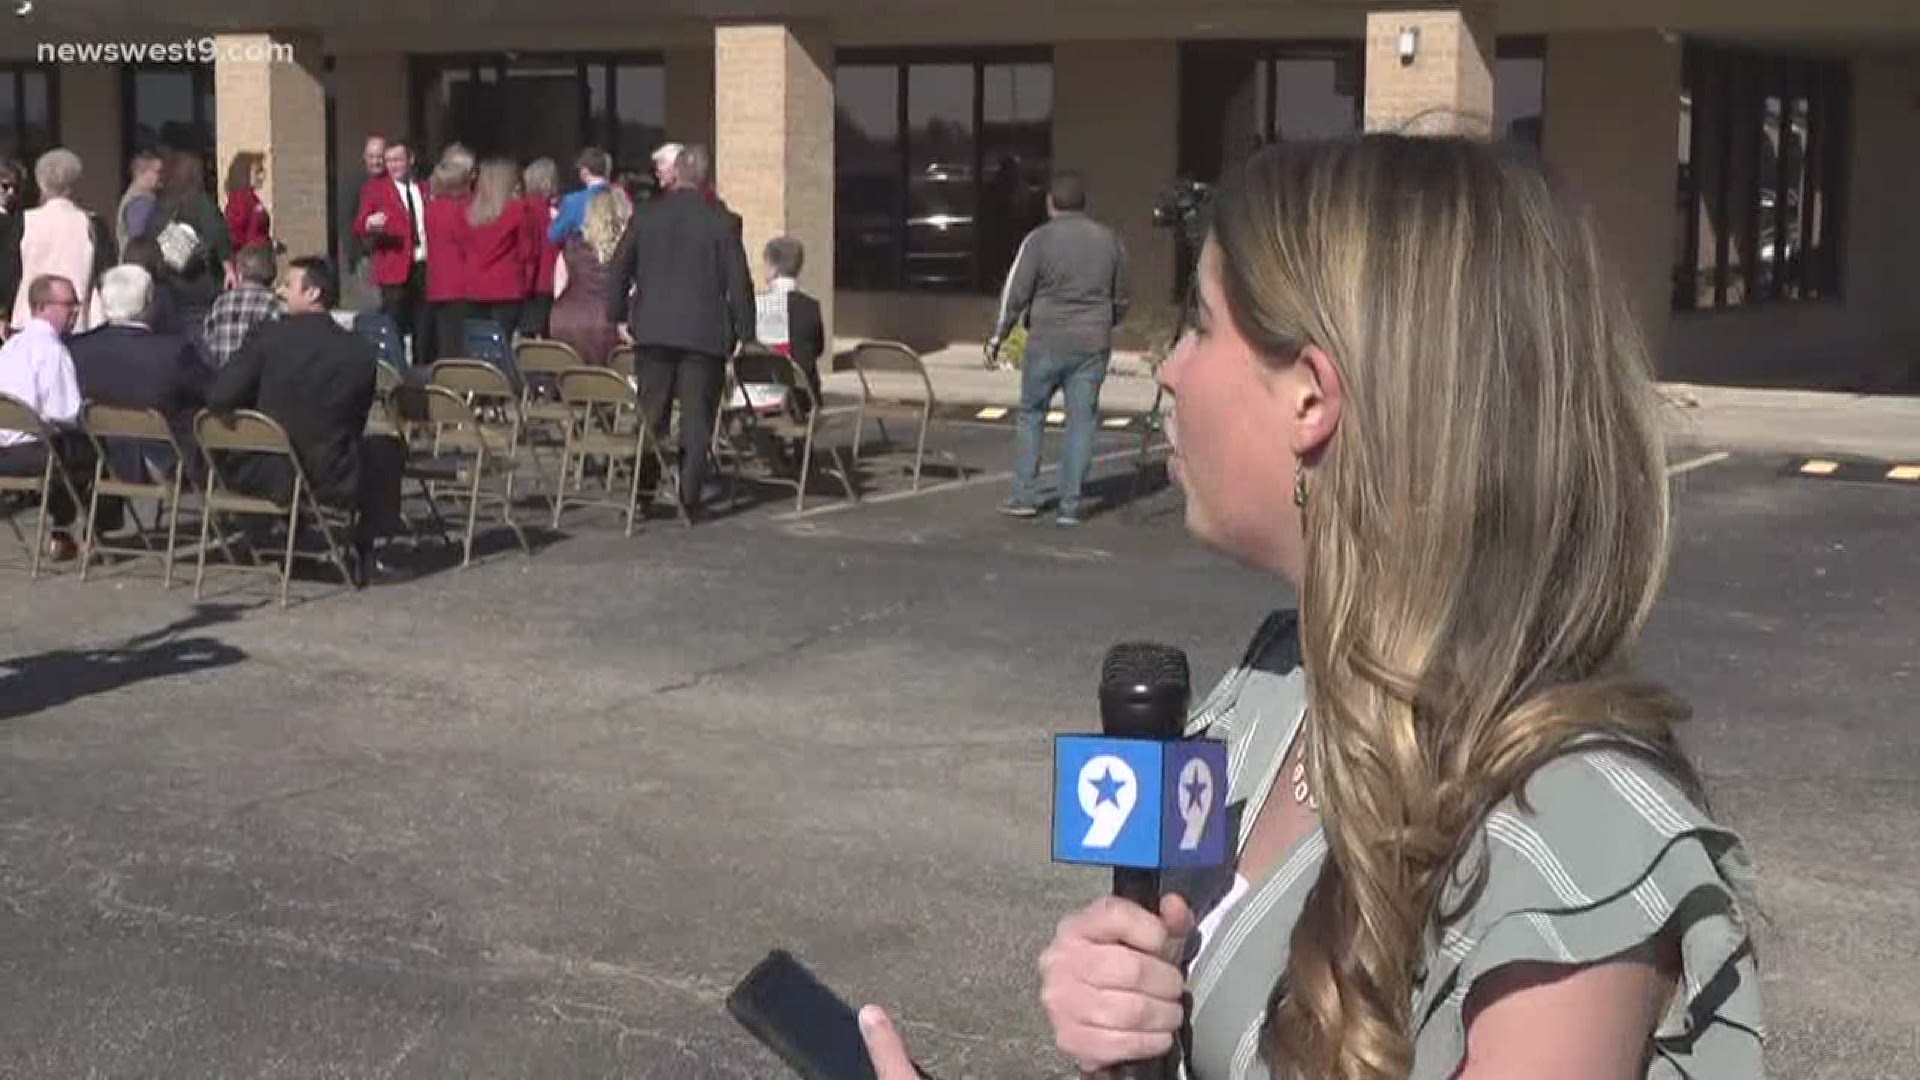 Family Resiliency Center of the Permian Basin opens Rachel live